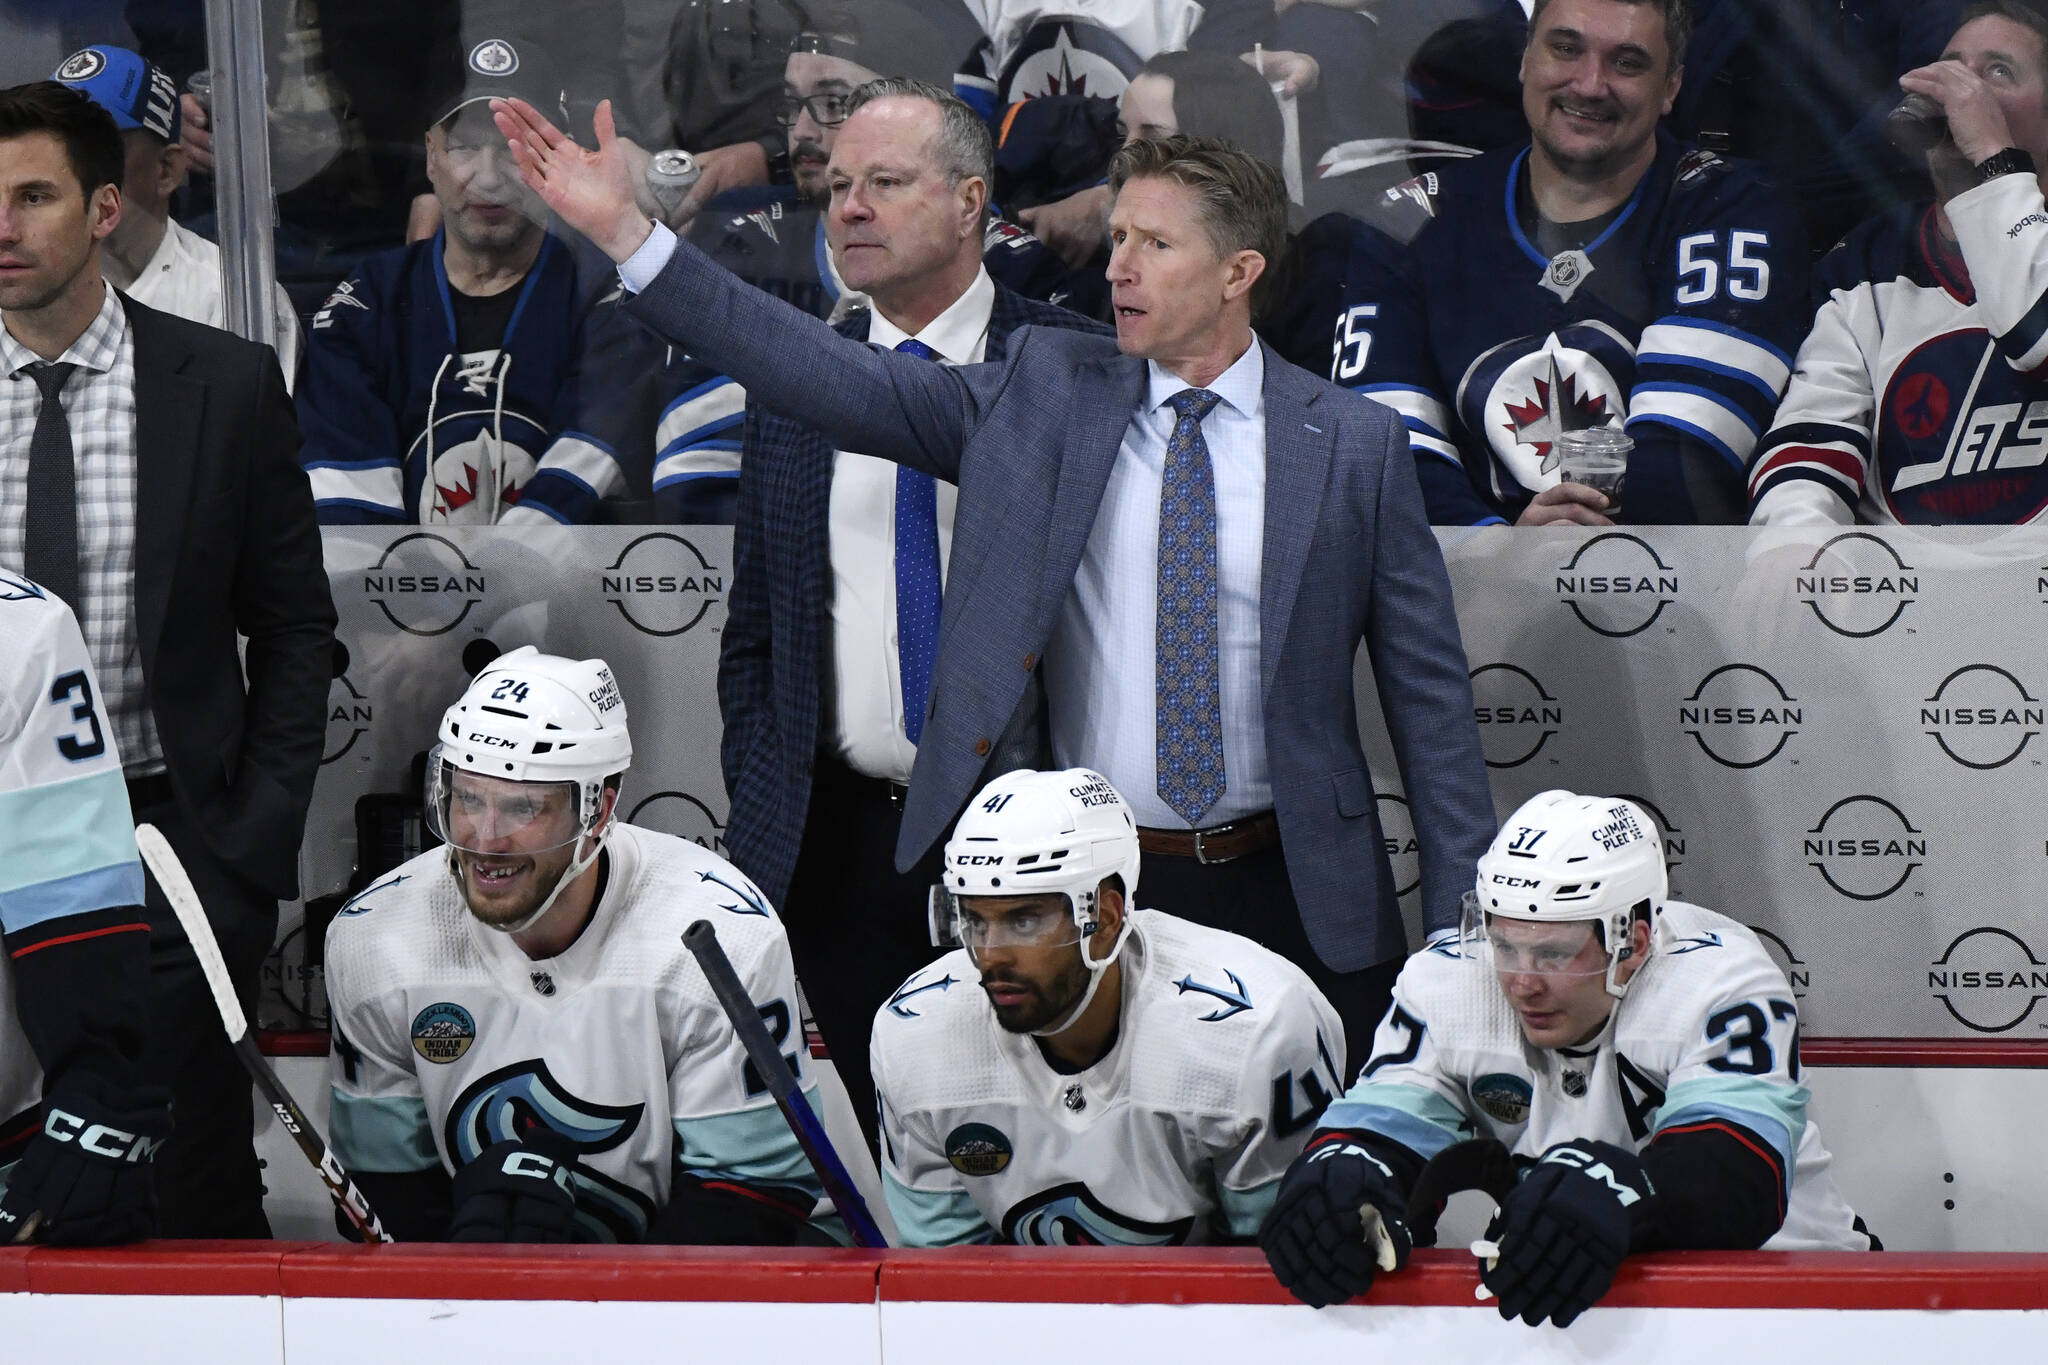 Seattle Kraken coach Dave Hakstol’s status remains in question after the team missed the playoffs. (Fred Greenslade/The Canadian Press via AP)